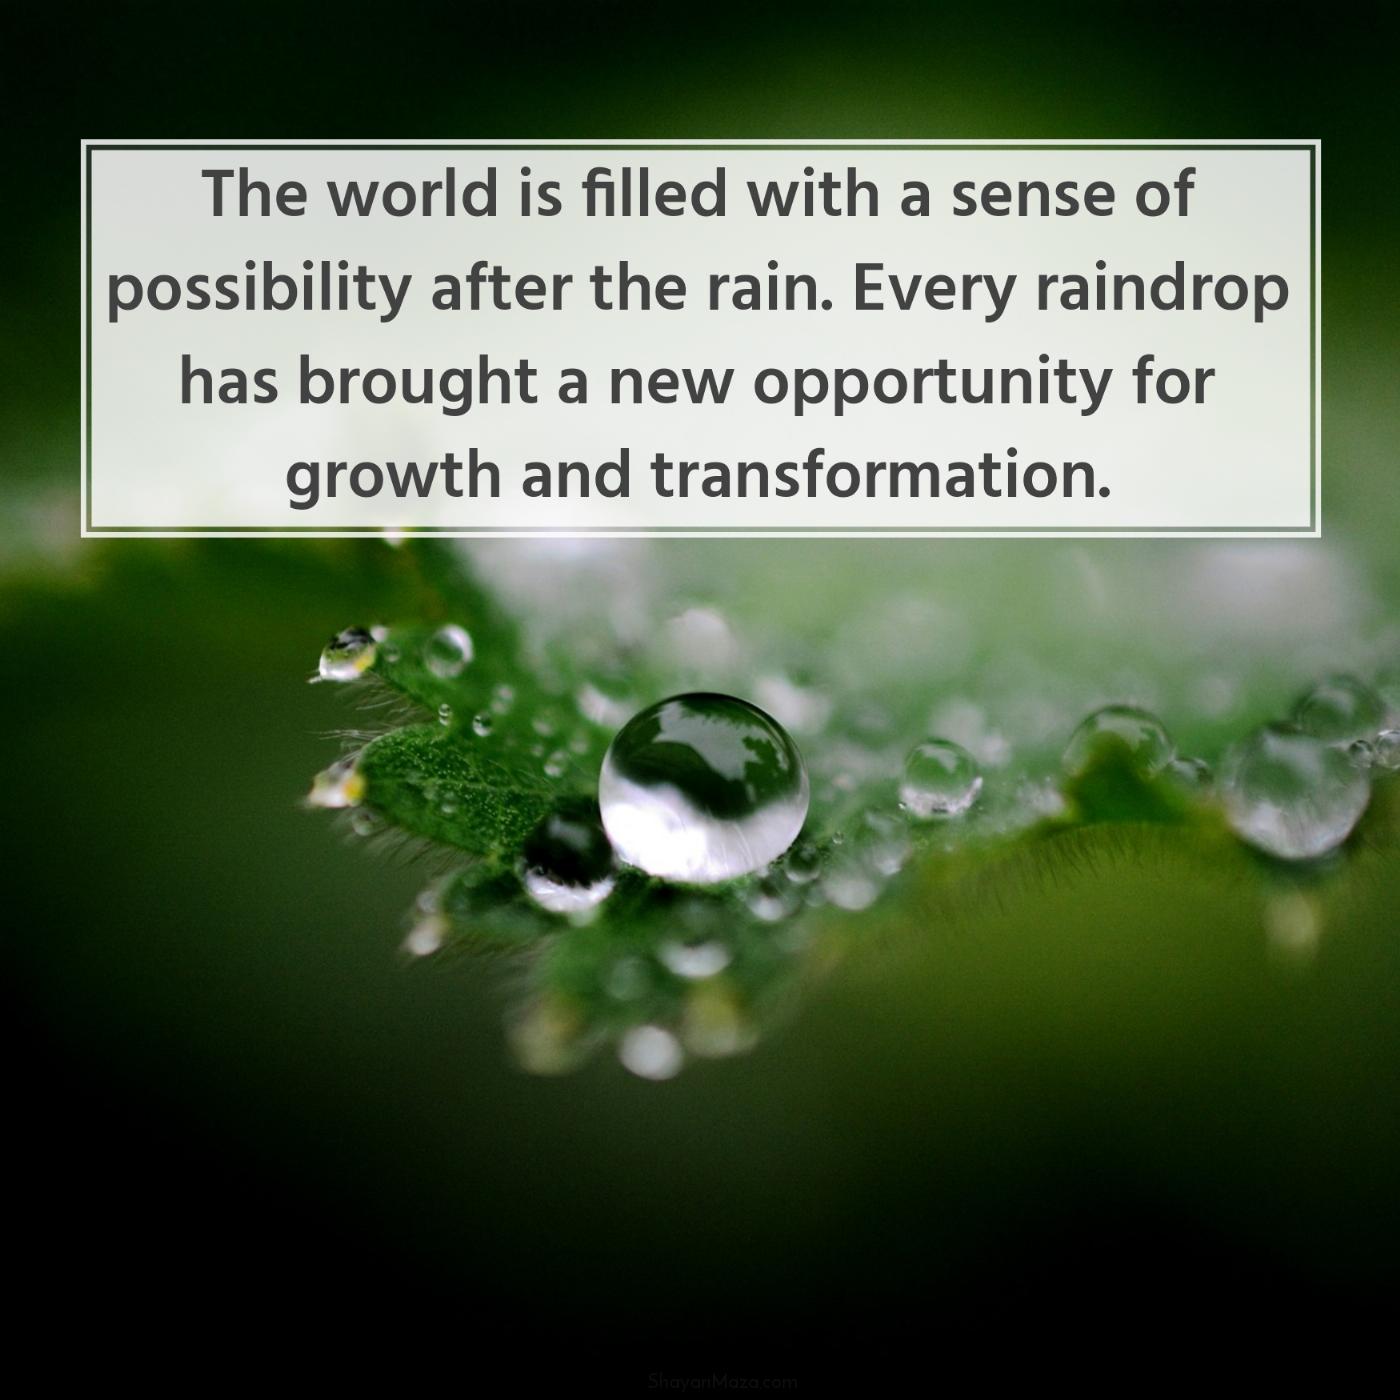 The world is filled with a sense of possibility after the rain